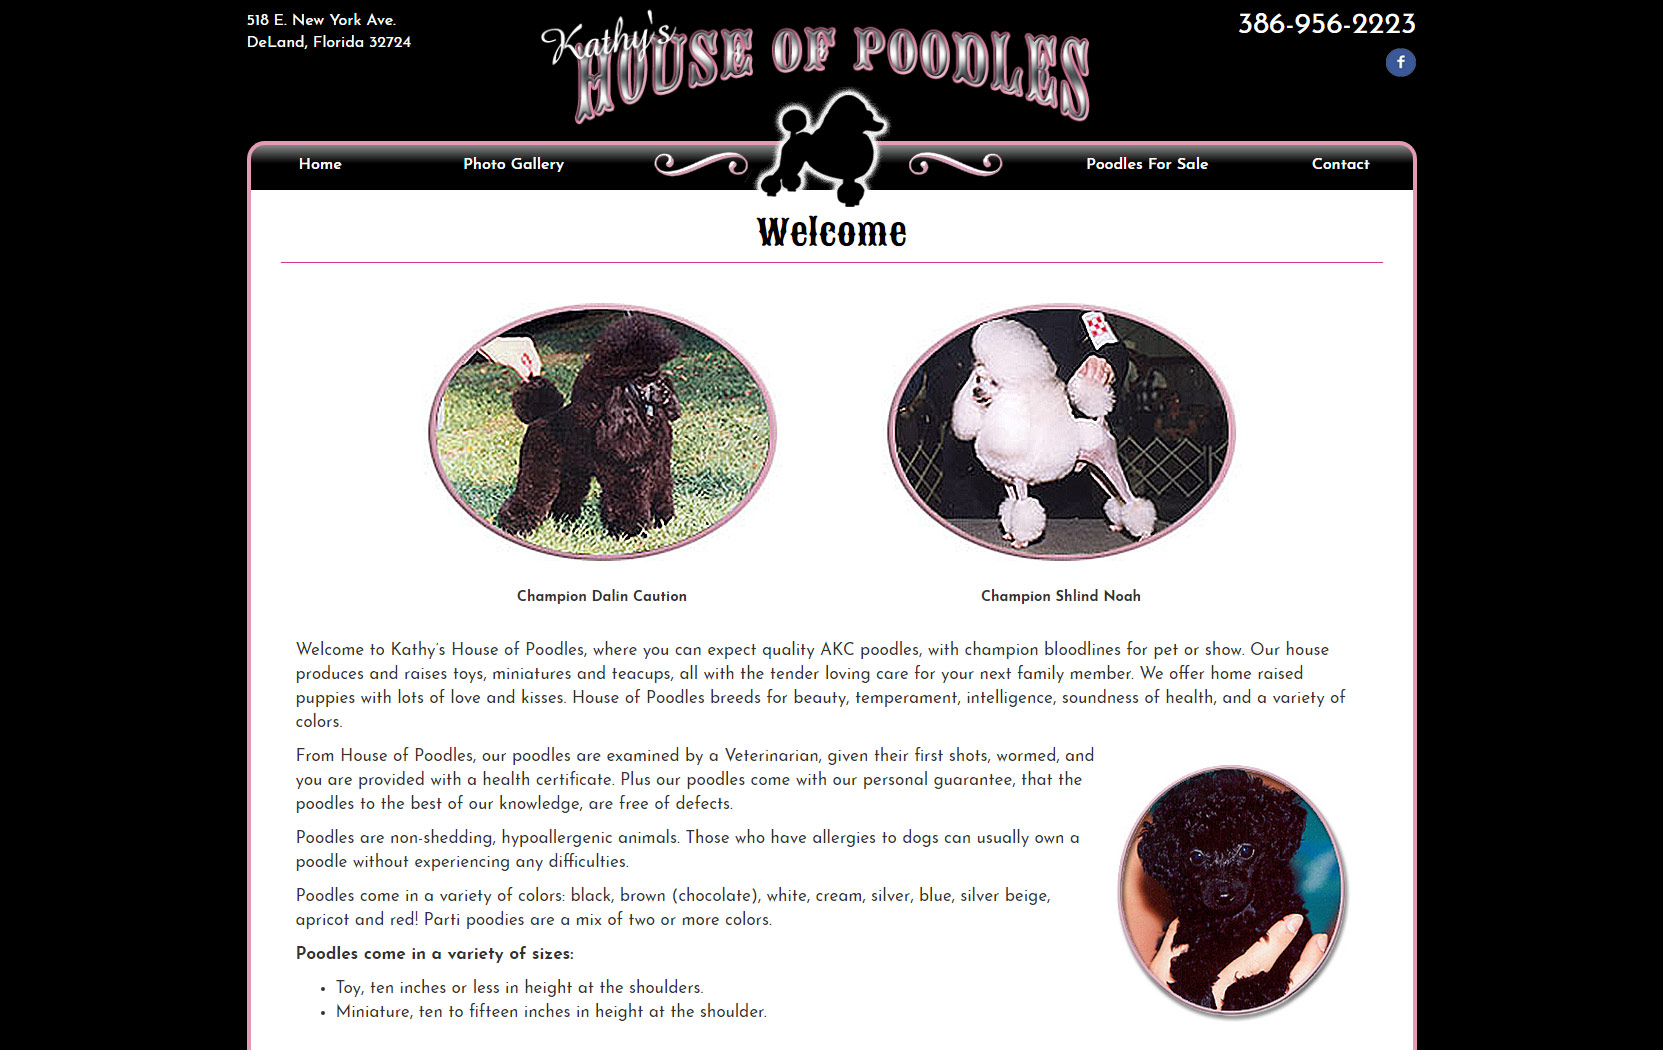 Kathy's House of Poodles